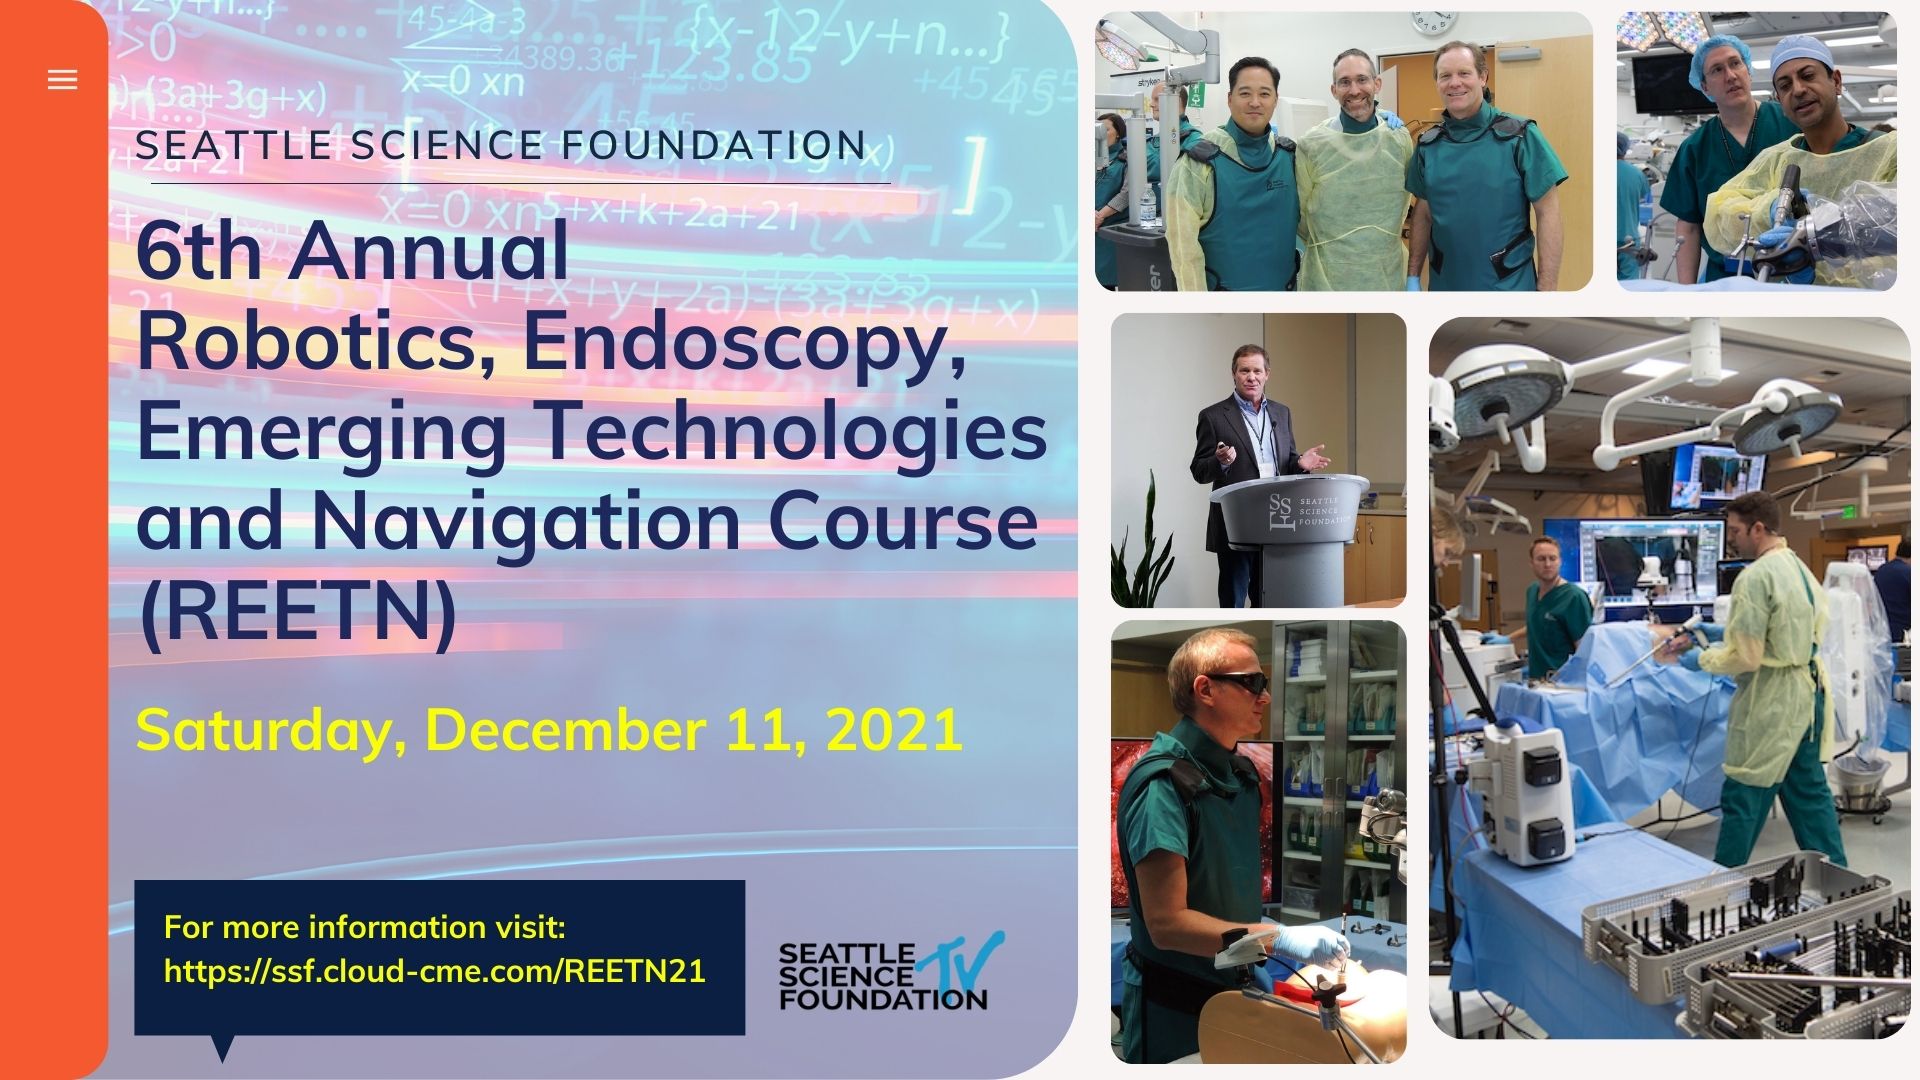 Photo with text that says Seattle Science Foundation 6th Annual Robotics, Endoscopy, Emerging Technologies and Navigation Course (REETN) Saturday, December 11th, 2021. For more information visit ssf.cloud-cme.com/REETN21. Seattle Science Foundation TV.